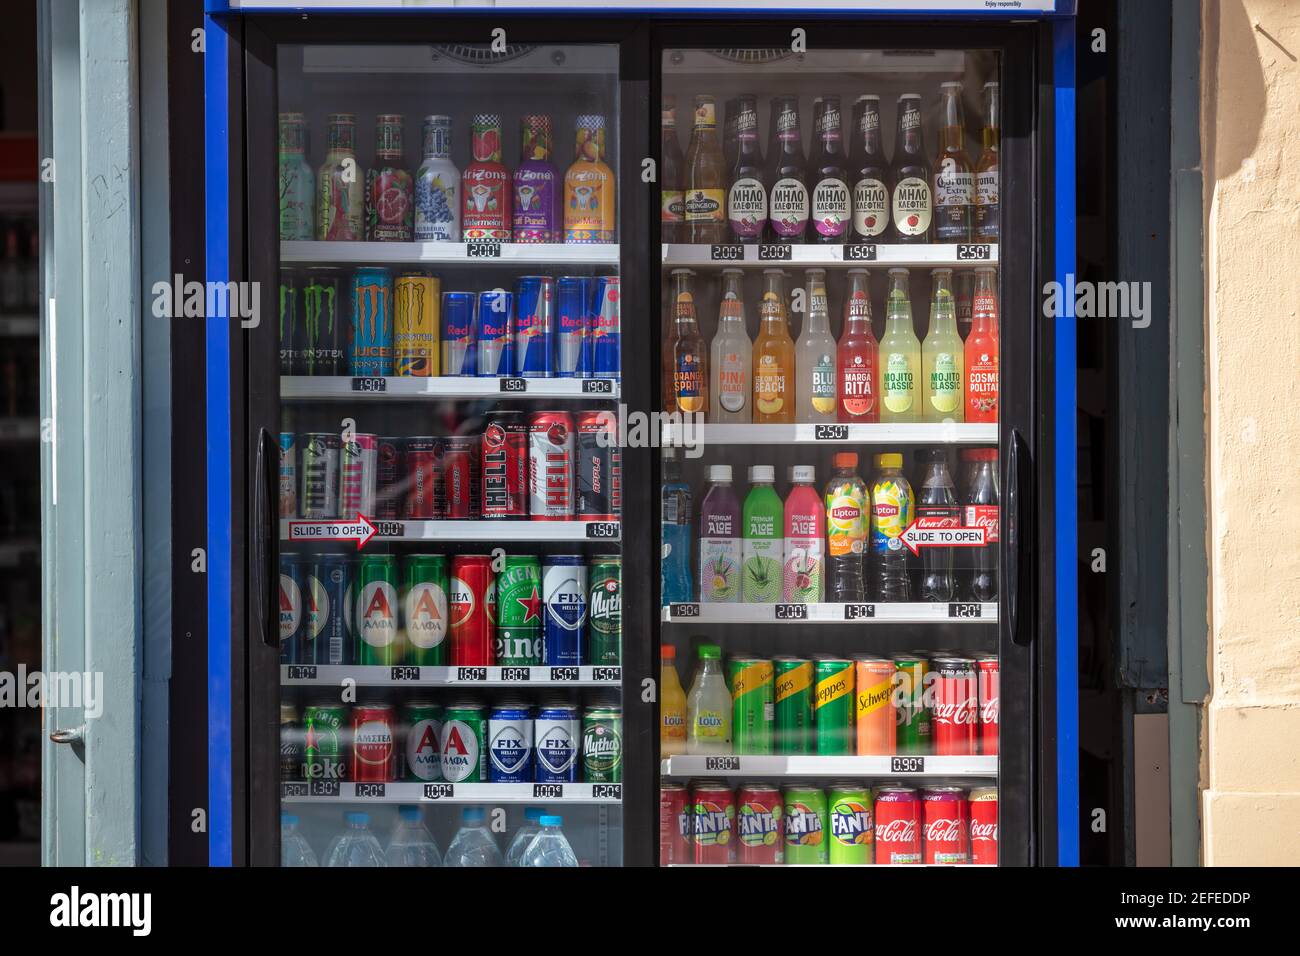 Greece, Athens historic center. February 11, 2021. Refreshments, outdoors refrigerator background. Exterior fridge cabinet with beverage variety for p Stock Photo